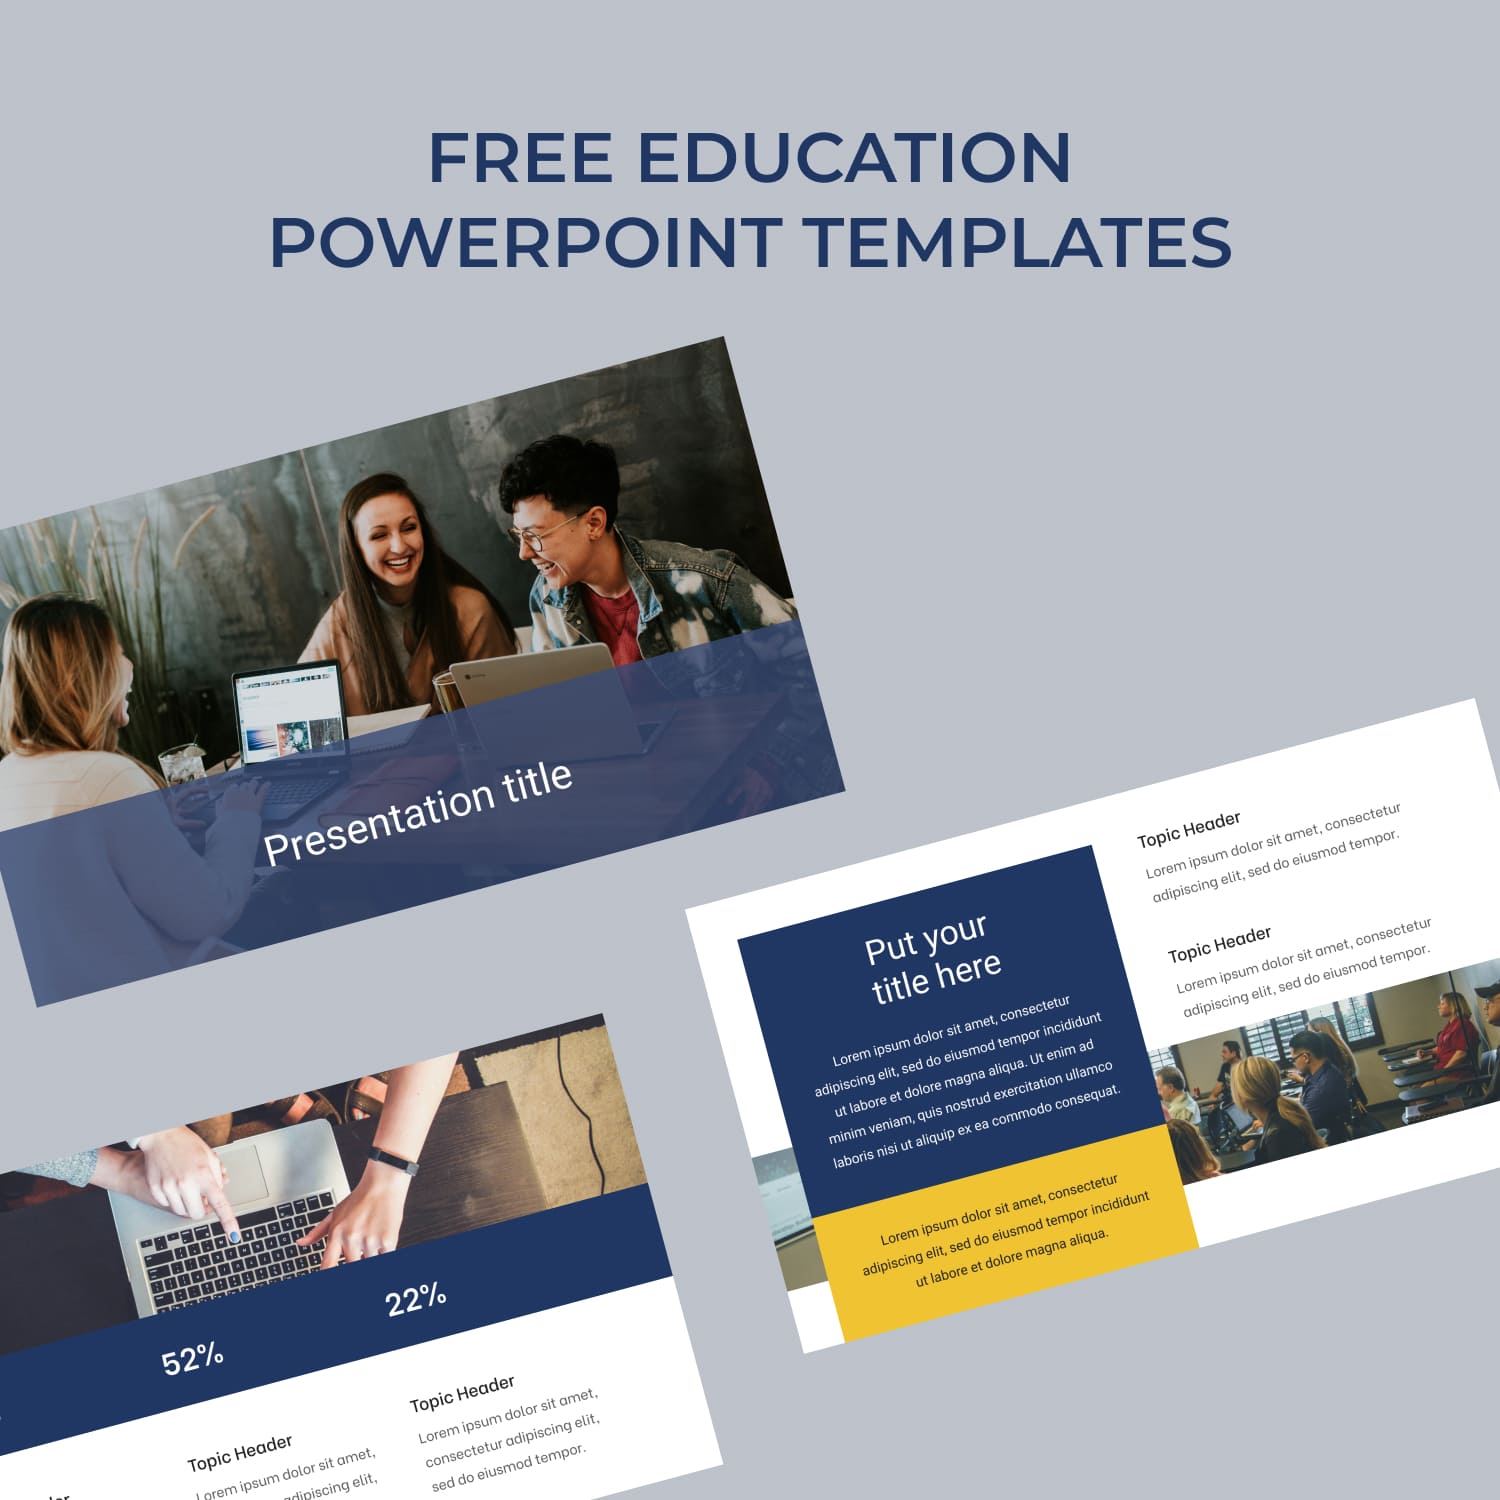 Free Education Powerpoint Templates 1500x1500 1.